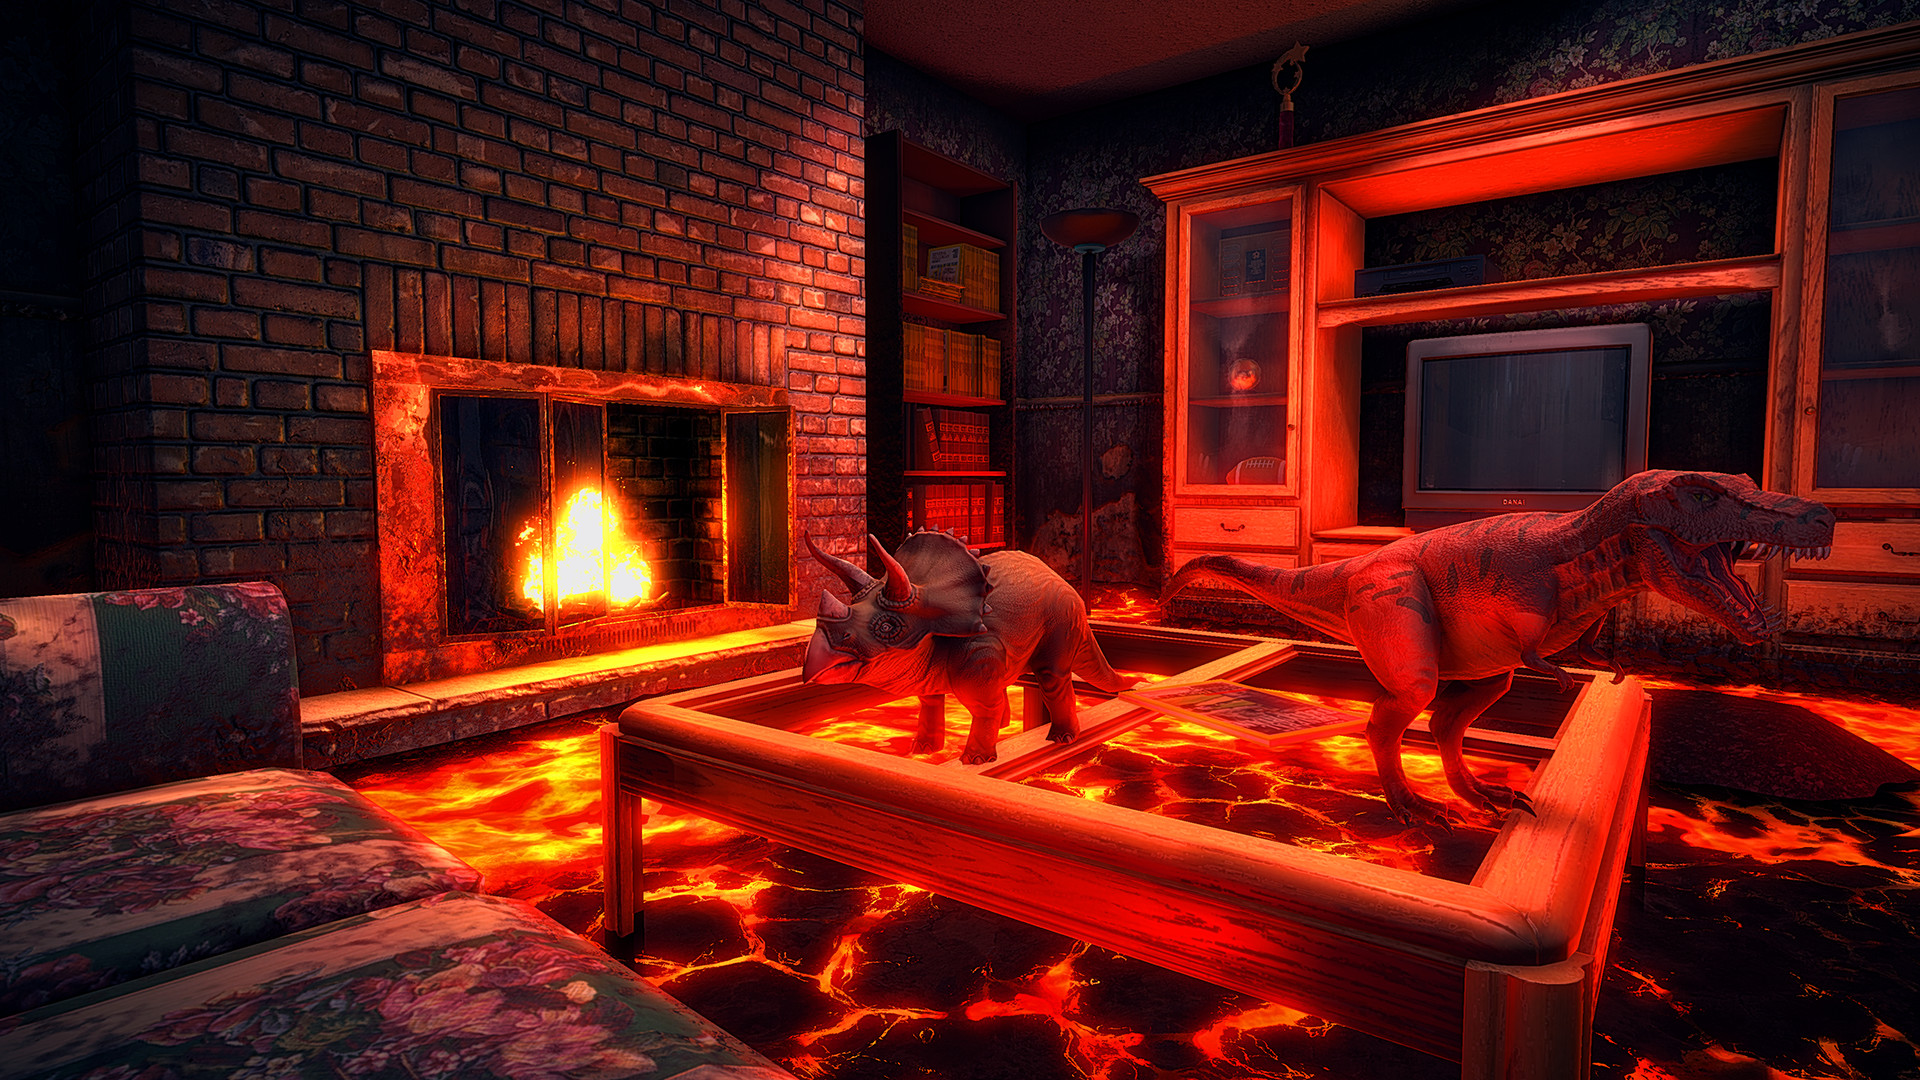 “Hot Lava” Gameplay Trailer Released - Relieve Your Chidhood